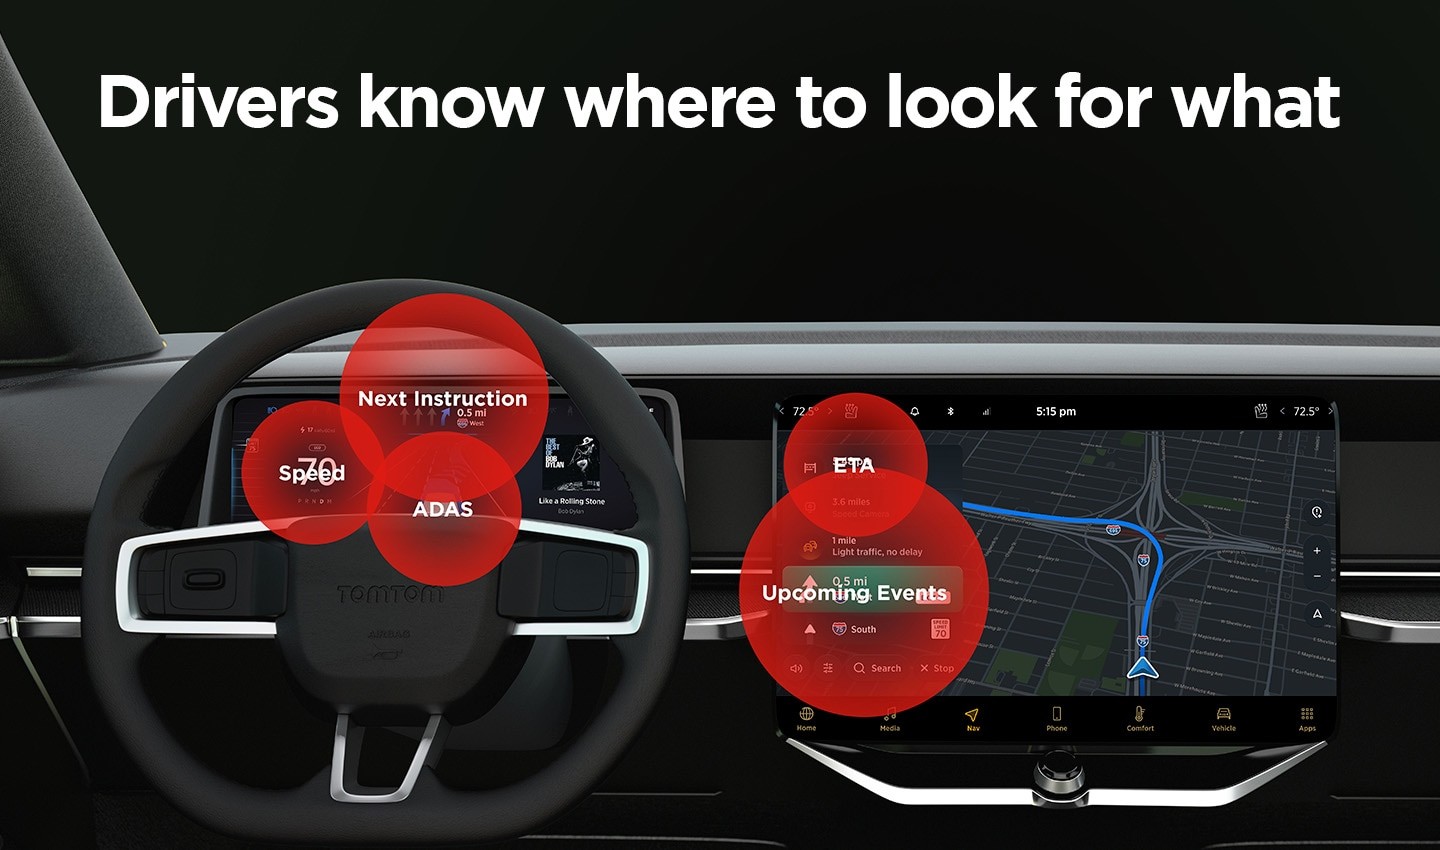 When display interfaces are designed as an entire ecosystem, drivers know where to look for information.